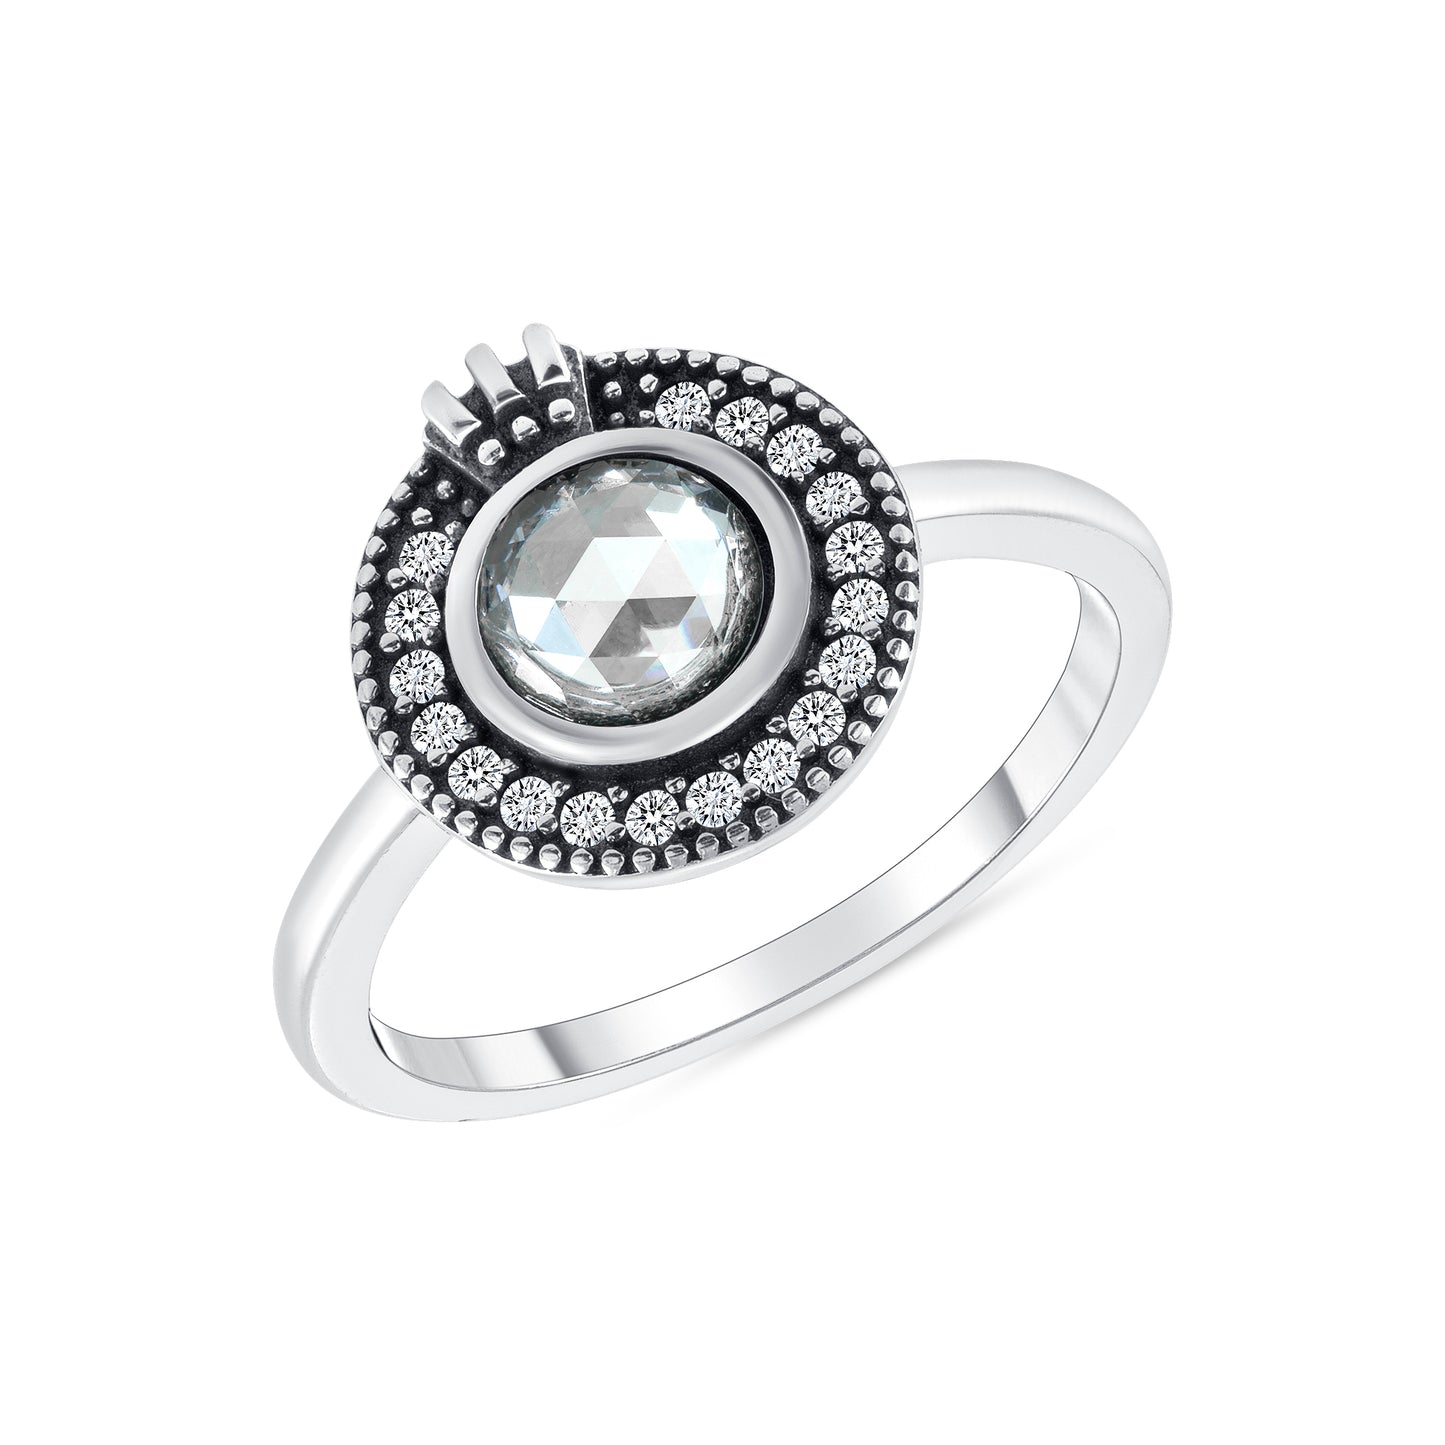 Silver 925 Rhodium Plated Round Stone Cubic Zirconia Ring. R10128